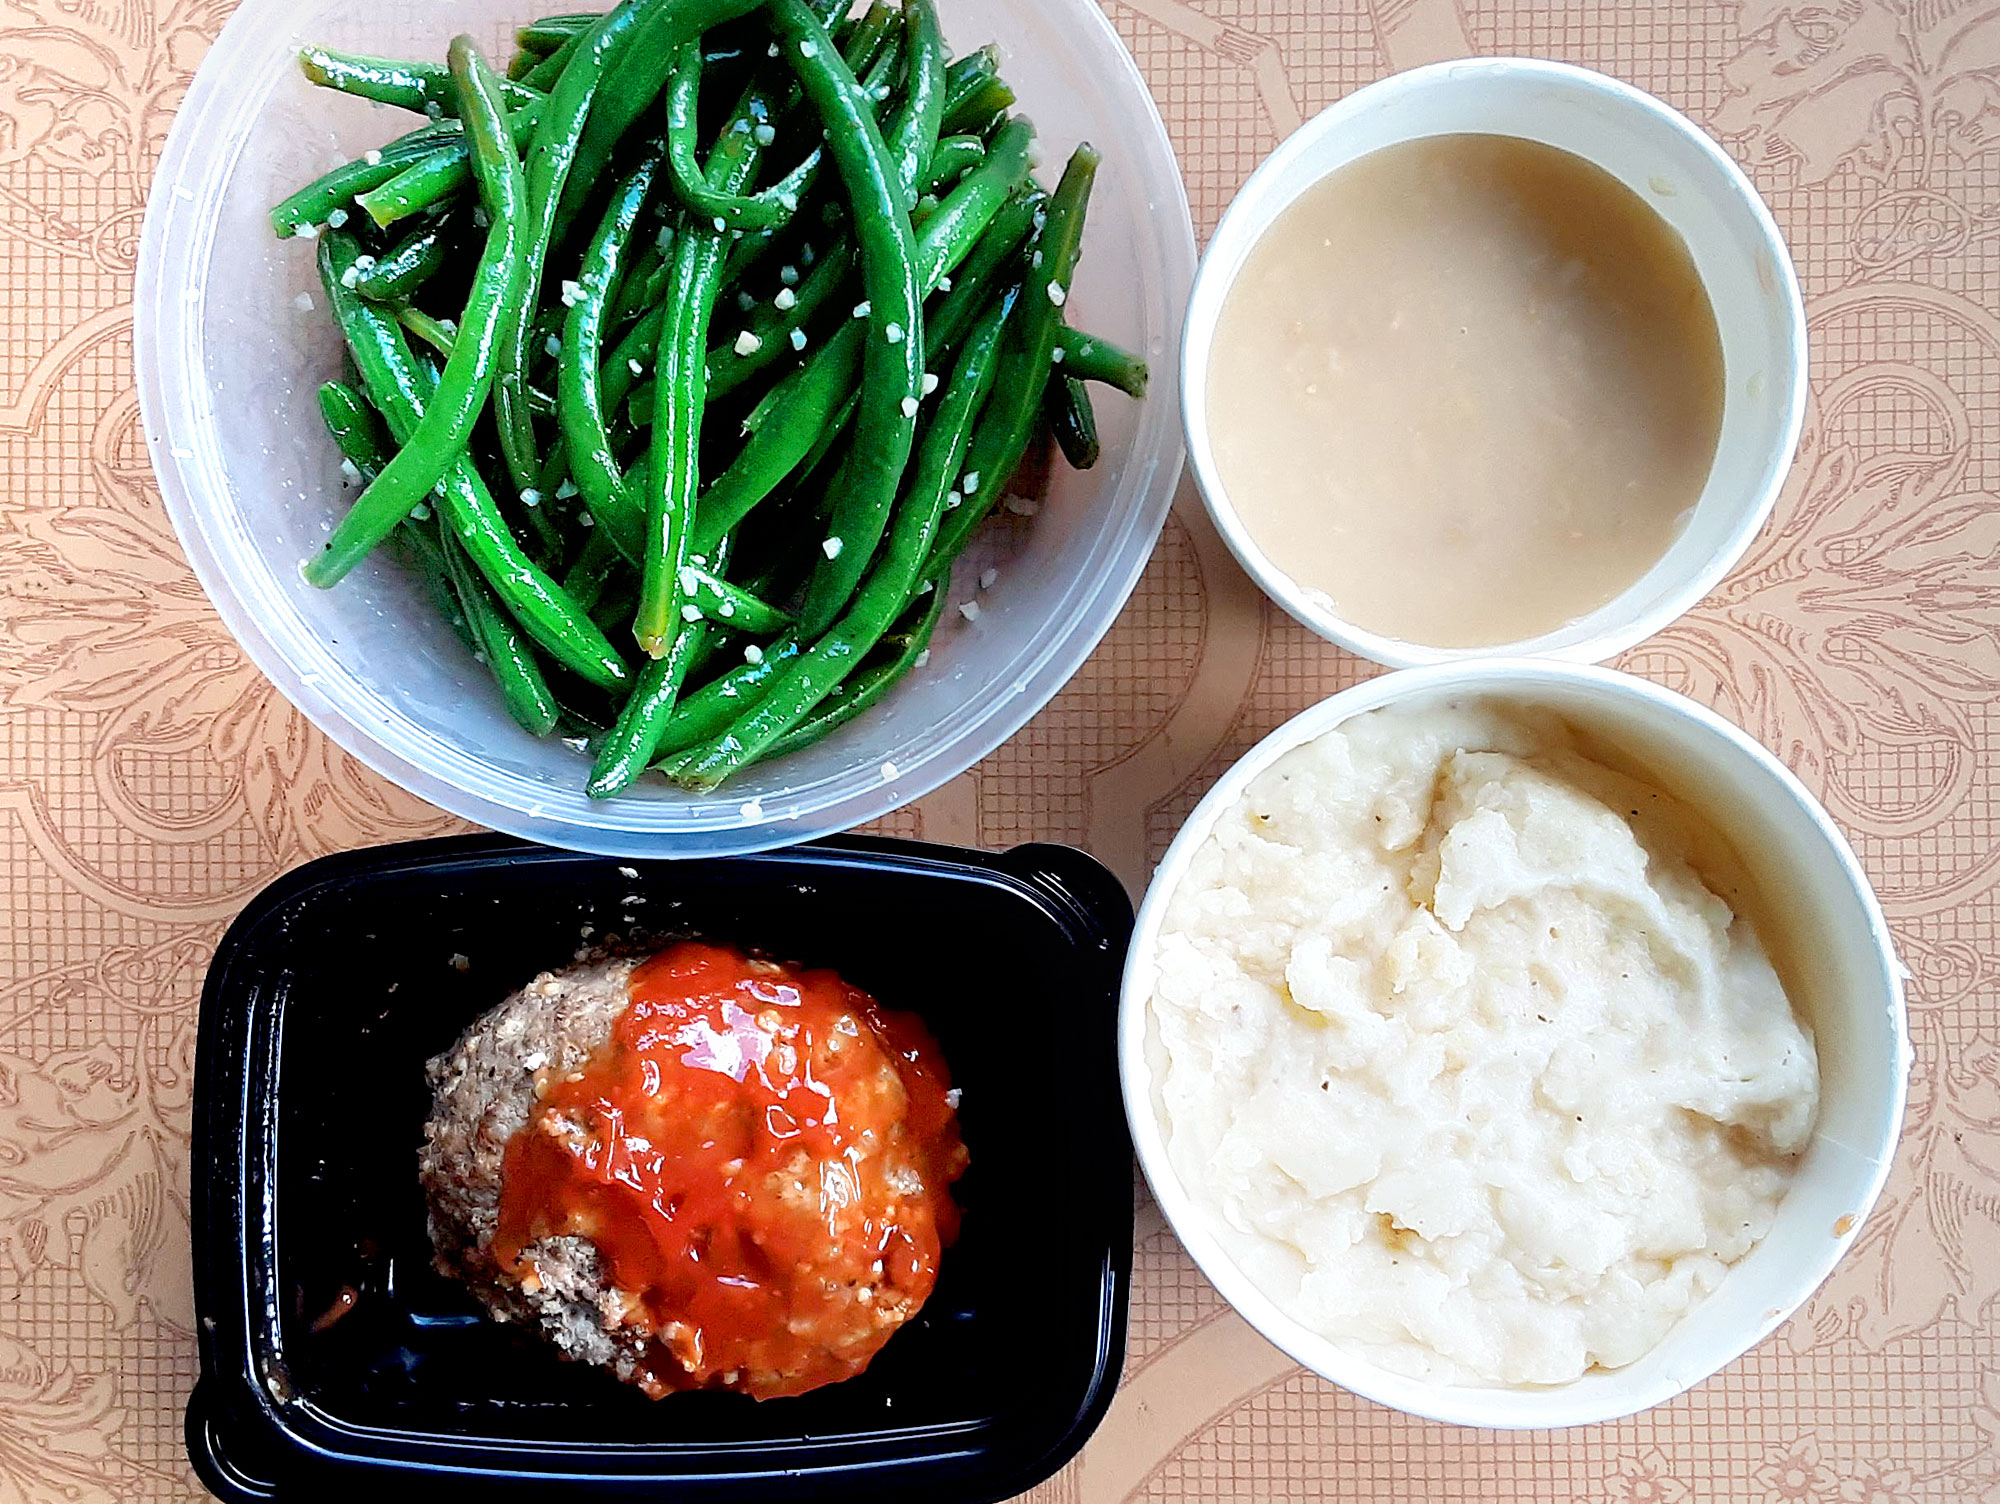 On a pink tablecloth, there are four dishes with dinner: green beans, gravy, mashed potatoes, and a circle meatloaf. Photo by Paul Young.